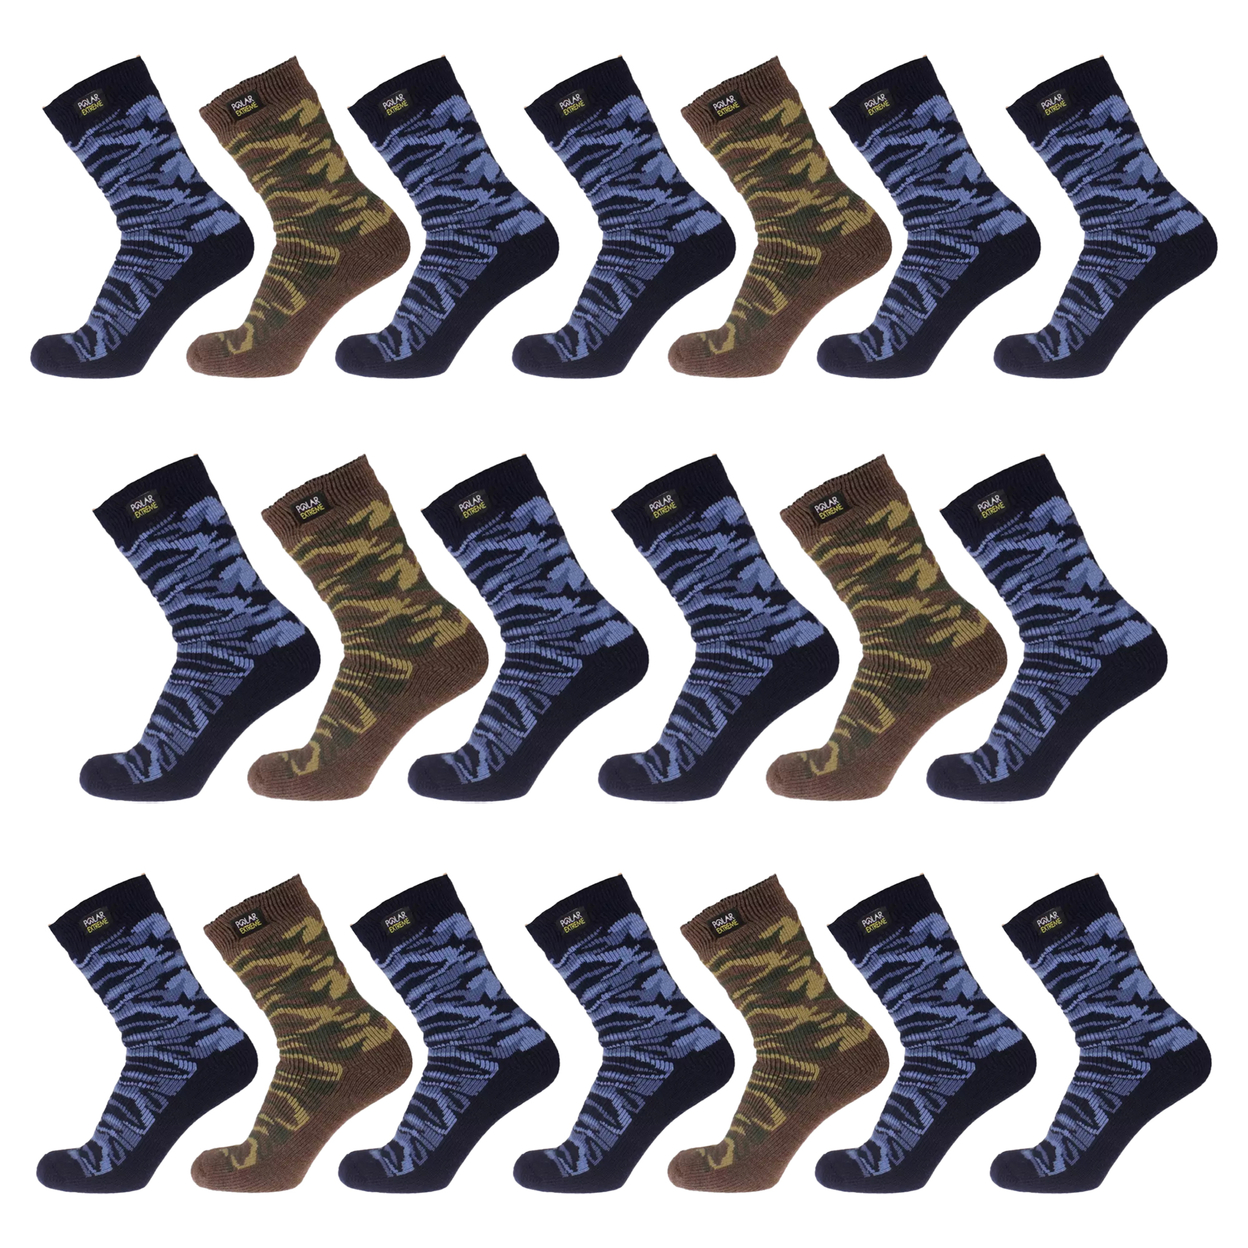 4-Pairs: Men's Polar Extreme Insulated Thermal Ultra-Soft Winter Warm Crew Socks